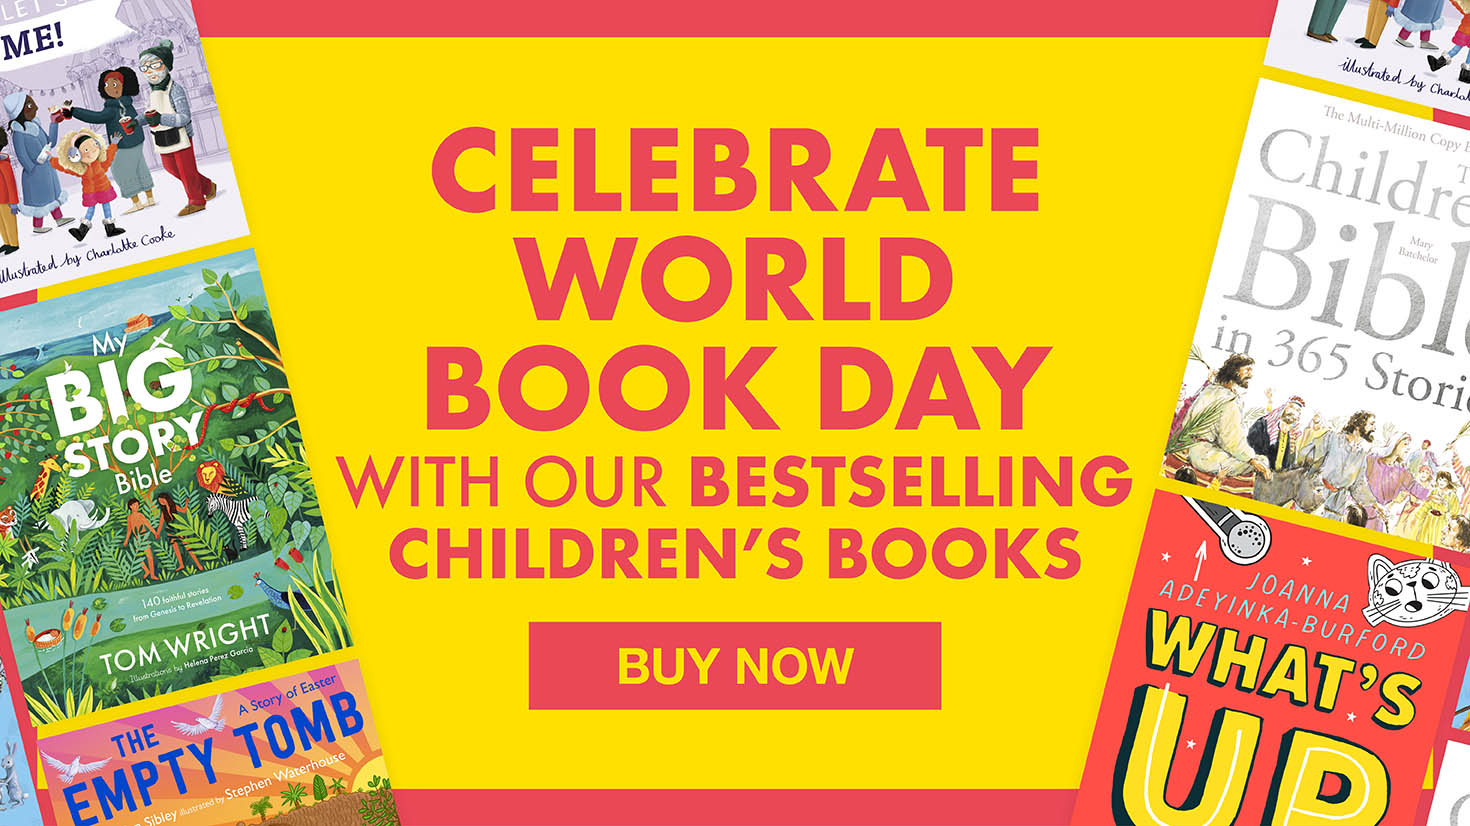 Share Your Love of Reading this World Book Day!